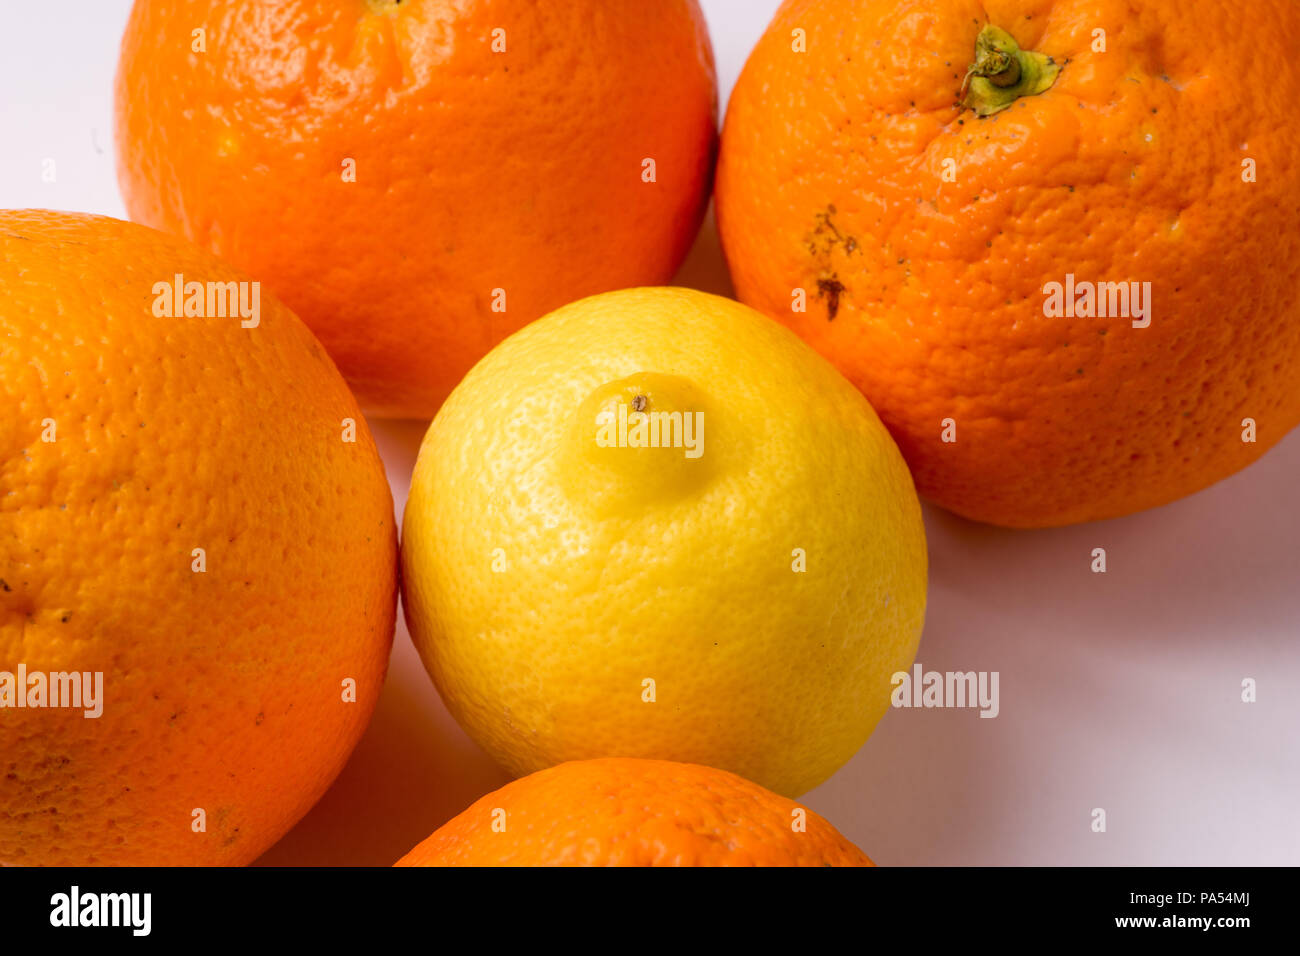 Bunch of Organic Oranges and lemon, close up and isolated Stock Photo